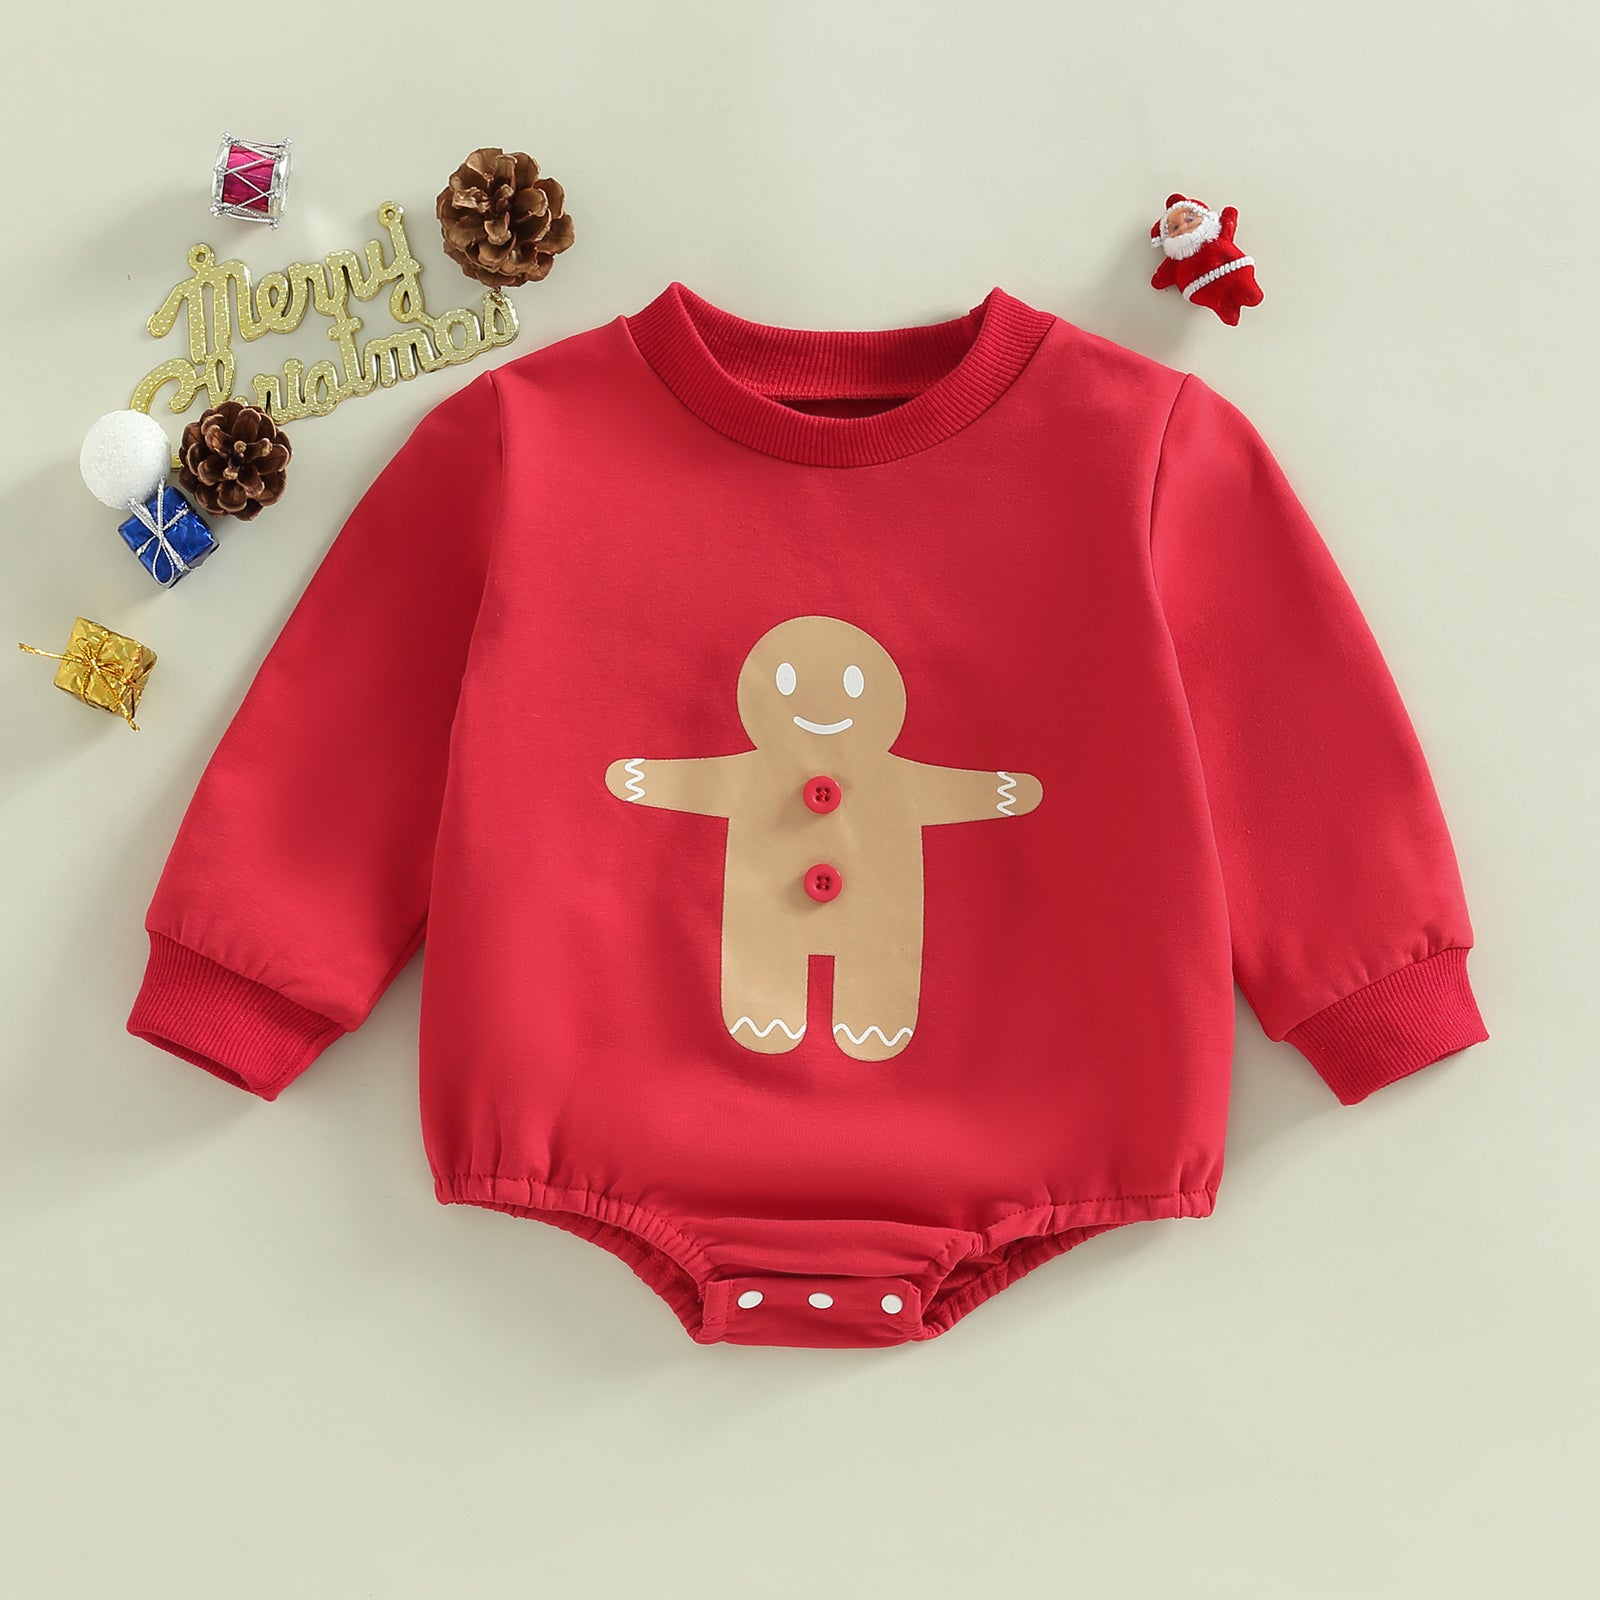 Infant Multi-color Christmas Tree Long-sleeved Harness